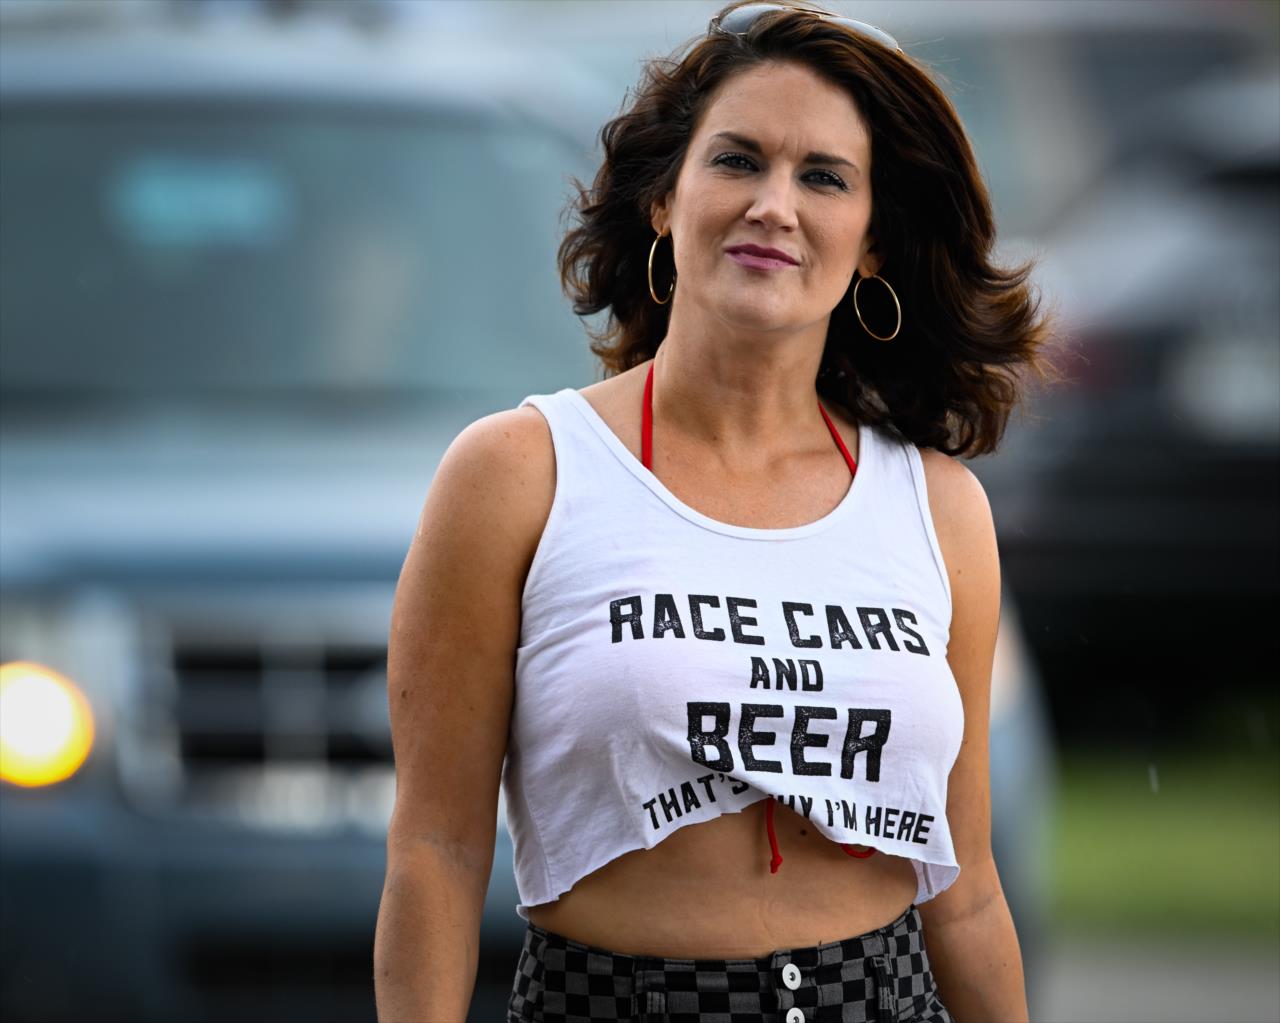 Fan of race cars and beer - By: Karl Zemlin -- Photo by: Karl Zemlin